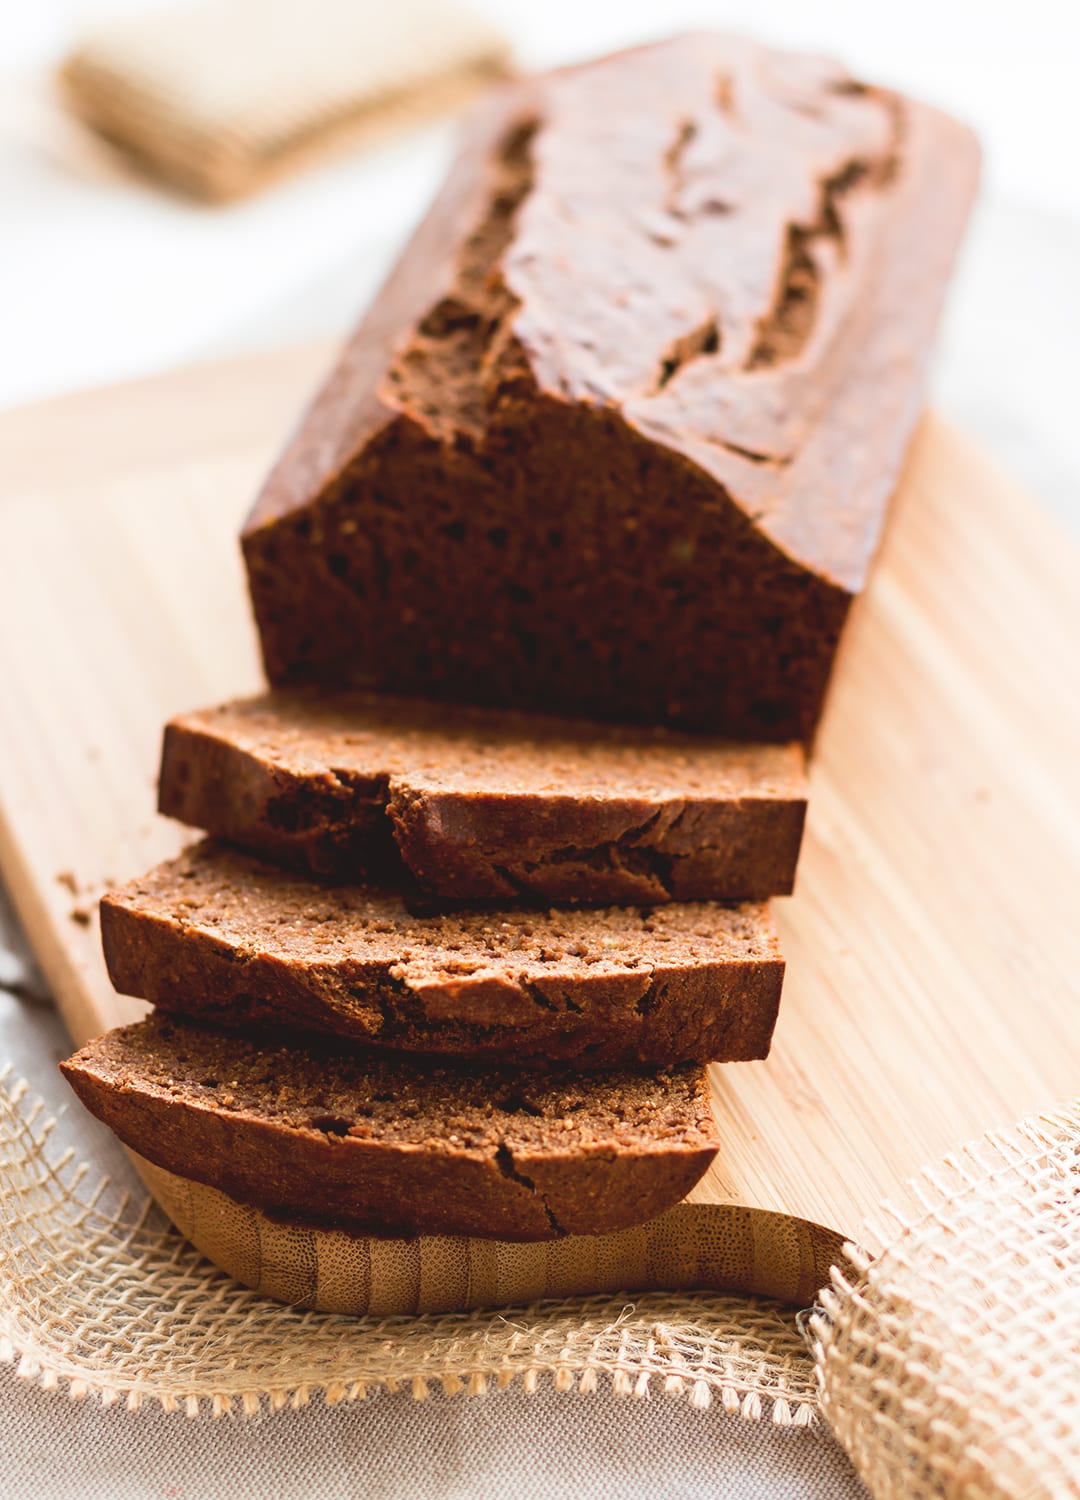  Healthy Banana Bread - delicious, sweet, hearty, and great with homemade nutella! This banana bread recipe is great for quick breakfast or a snack with raspberry chia jam or coconut yoghurt. | thehealthfulideas.com